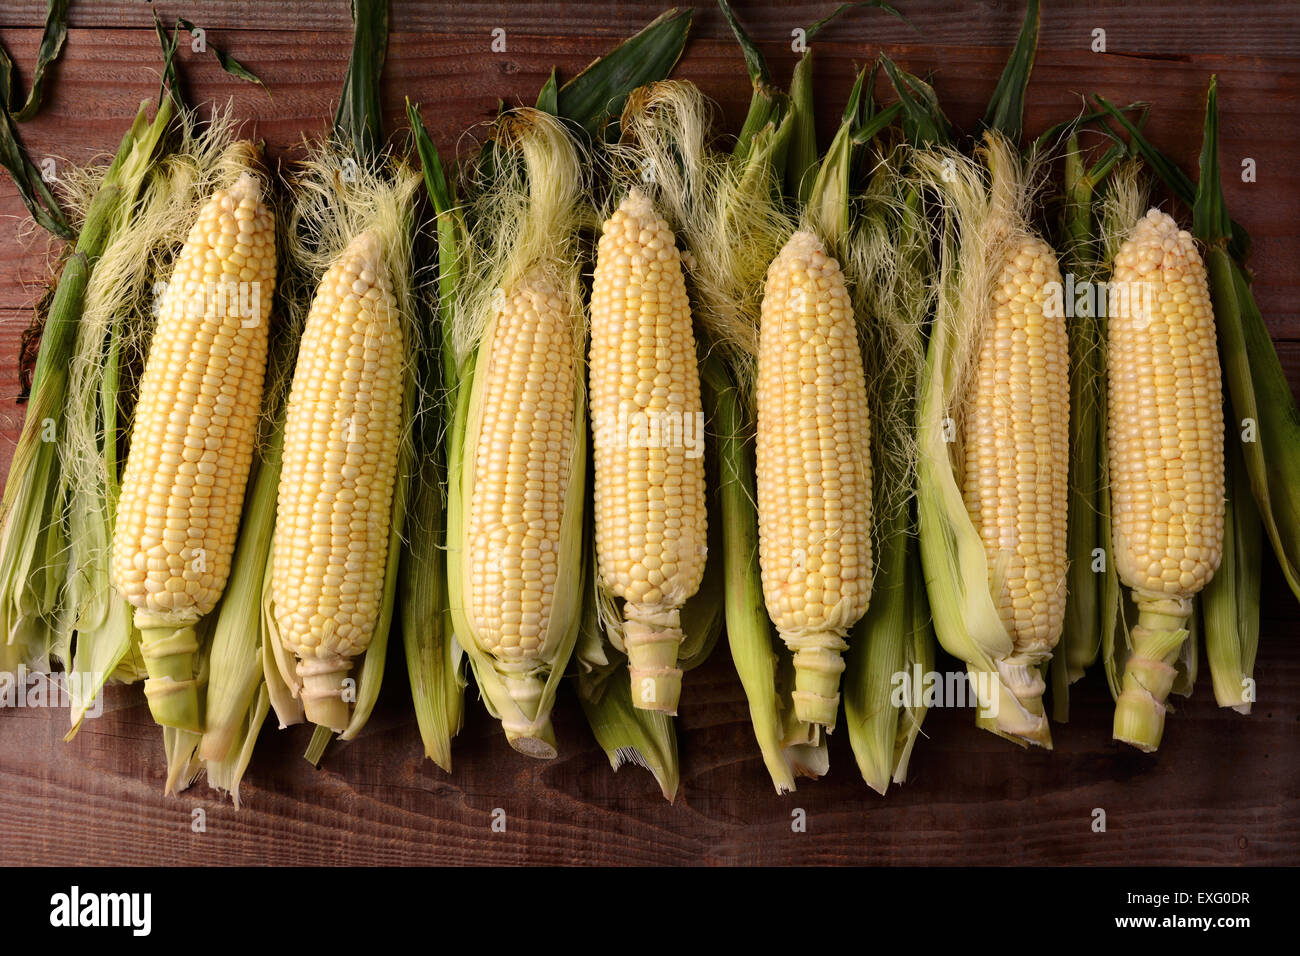 Several fresh picked and shucked corn on the cob ears on a rustic wood table. The sweet corn is shot from a high angle Stock Photo